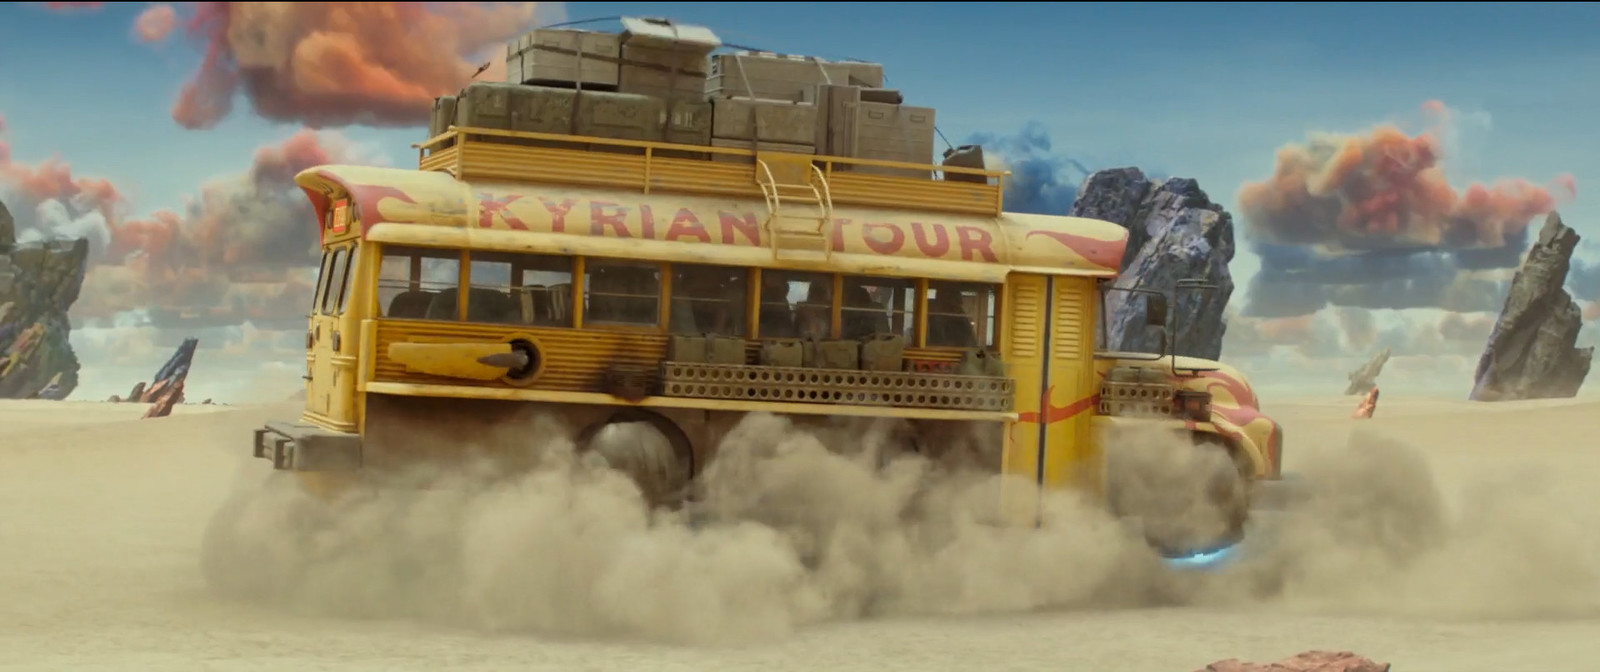 (Valerian: City of a Thousand Planets - ILM) Combat Bus - Modelled both Tourist and Combat variations of the bus